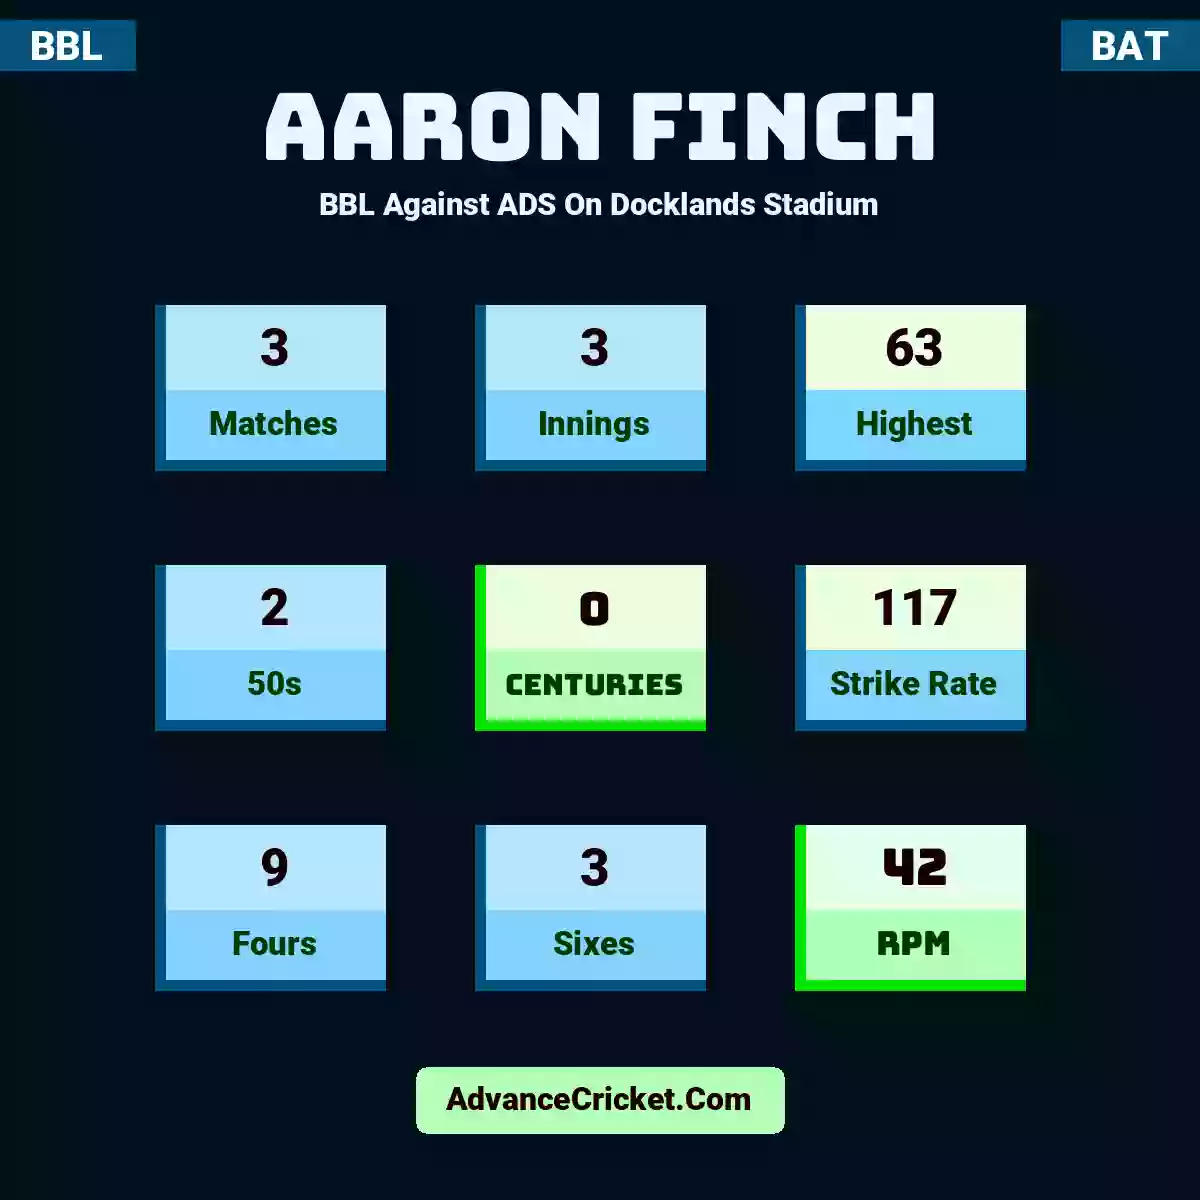 Aaron Finch BBL  Against ADS On Docklands Stadium, Aaron Finch played 3 matches, scored 63 runs as highest, 2 half-centuries, and 0 centuries, with a strike rate of 117. A.Finch hit 9 fours and 3 sixes, with an RPM of 42.